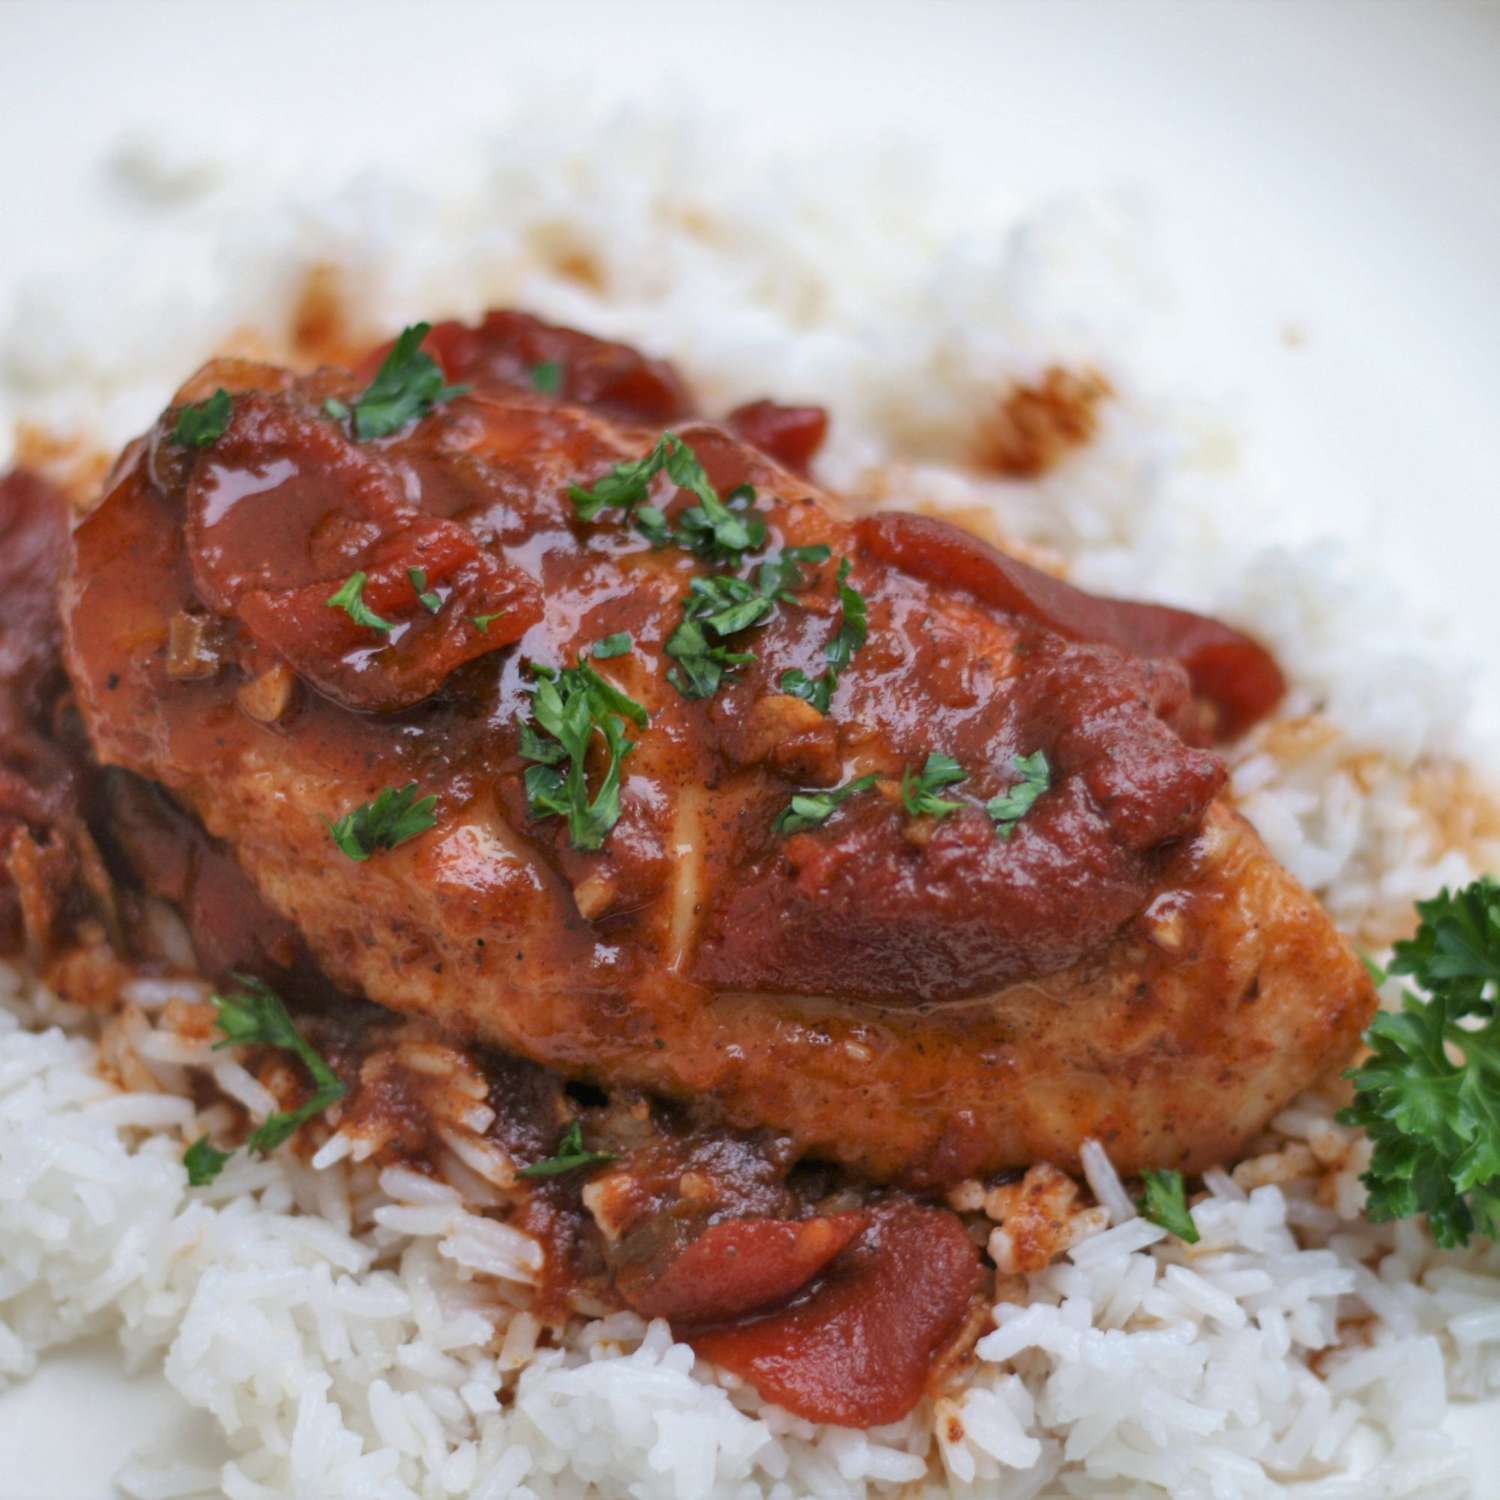 Chicken breasts Pierre with sauce on bed of rice